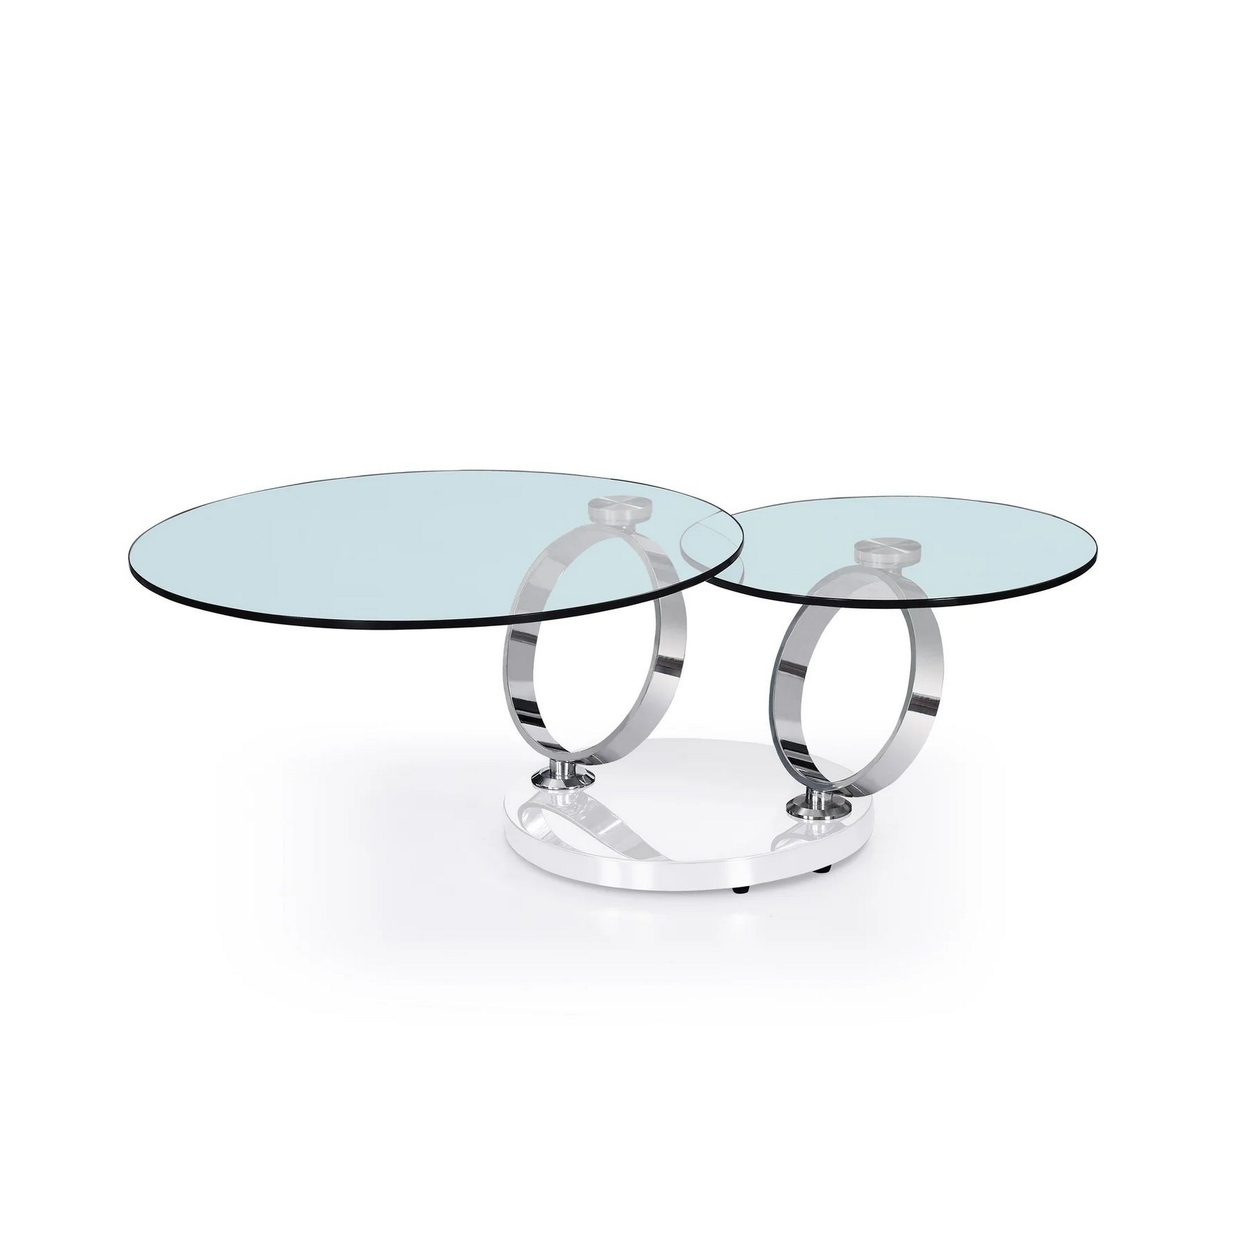 Gol 32 -53 Inch Extendable Coffee Table, 2 Round Tempered Glass Tops, White - Saltoro Sherpi